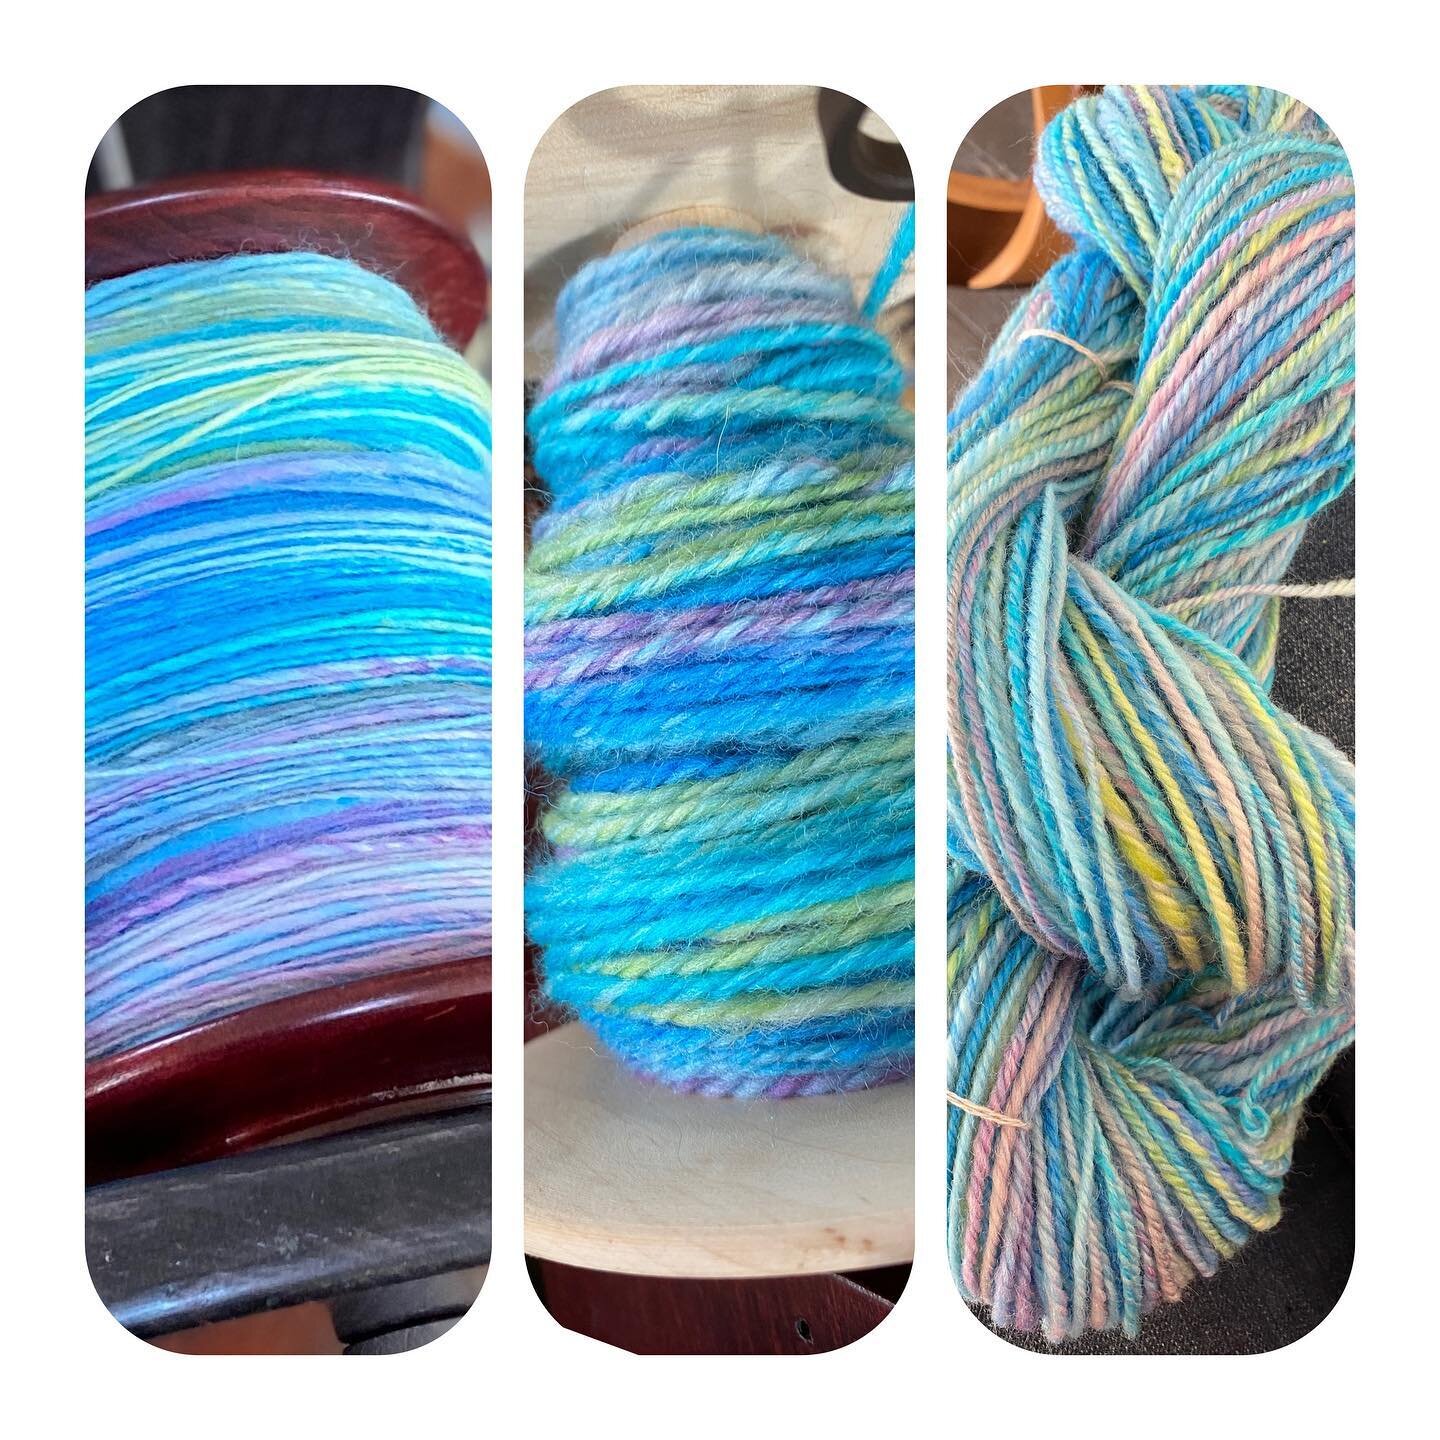 Spin, ply, skein.  Lovely Falkland wool fiber dyed by @yourfiberygodmother in the color-way Icy Iridescence. To me it is like making a birthday cake of yarn. 

#wool #falklandsheep #handspinnersofinstagram #handspunyarn #madewithlove #pastel #fun #in